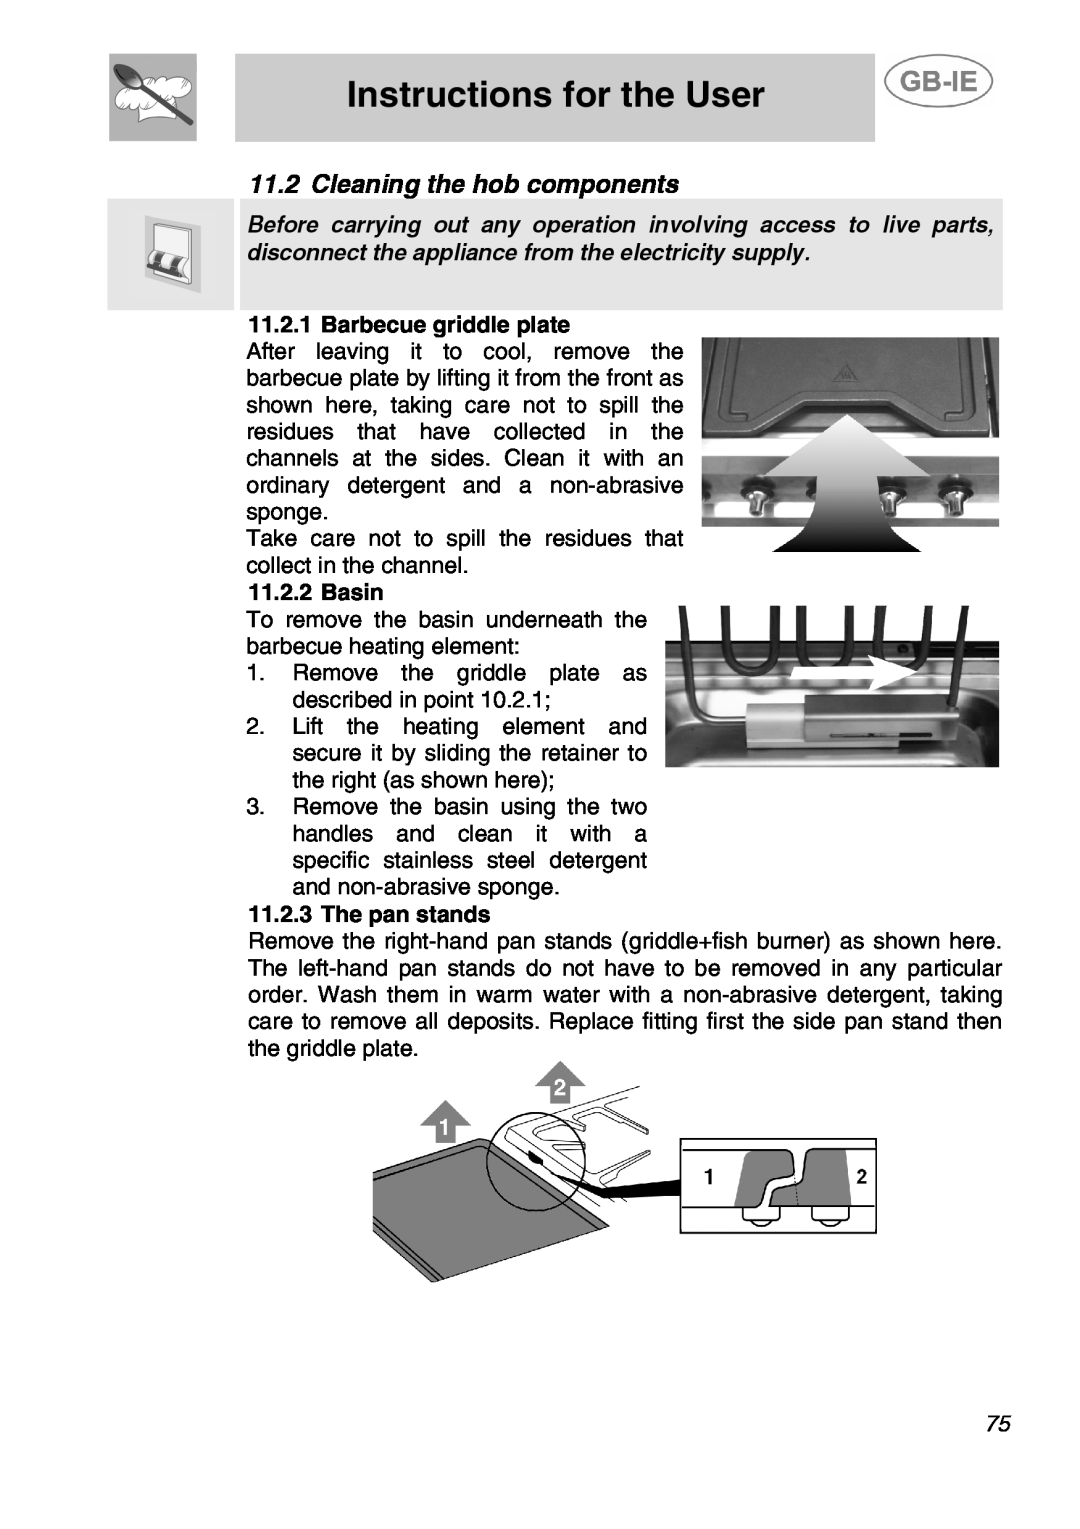 Smeg A5-6 manual Cleaning the hob components, Barbecue griddle plate, Basin, The pan stands, Instructions for the User 